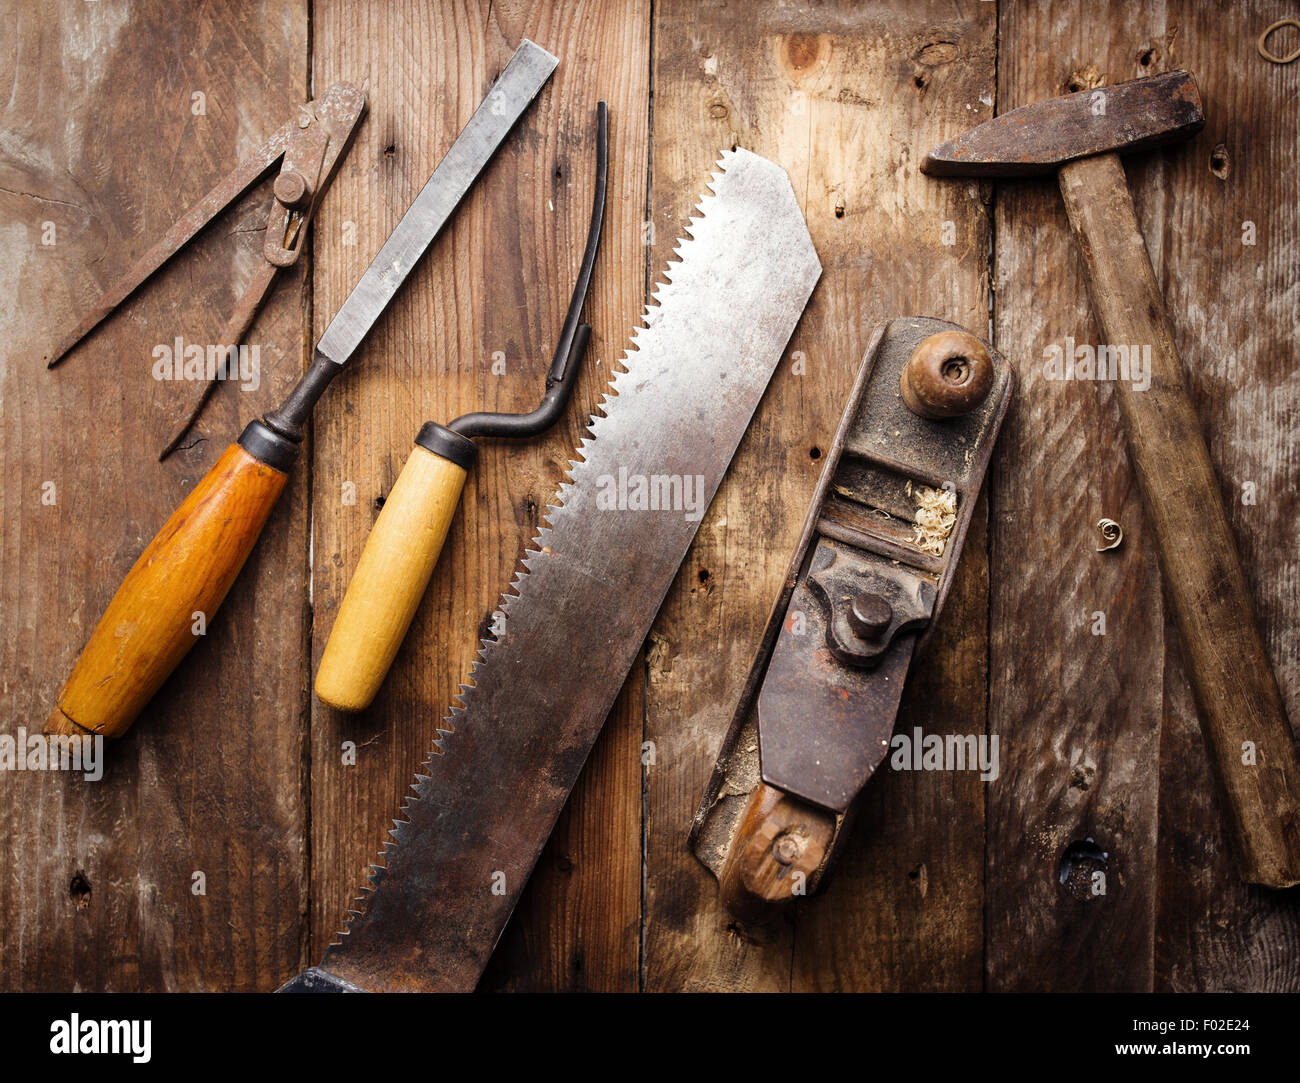 Od vintage hand tools on wooden background. Carpenter workplace Stock Photo